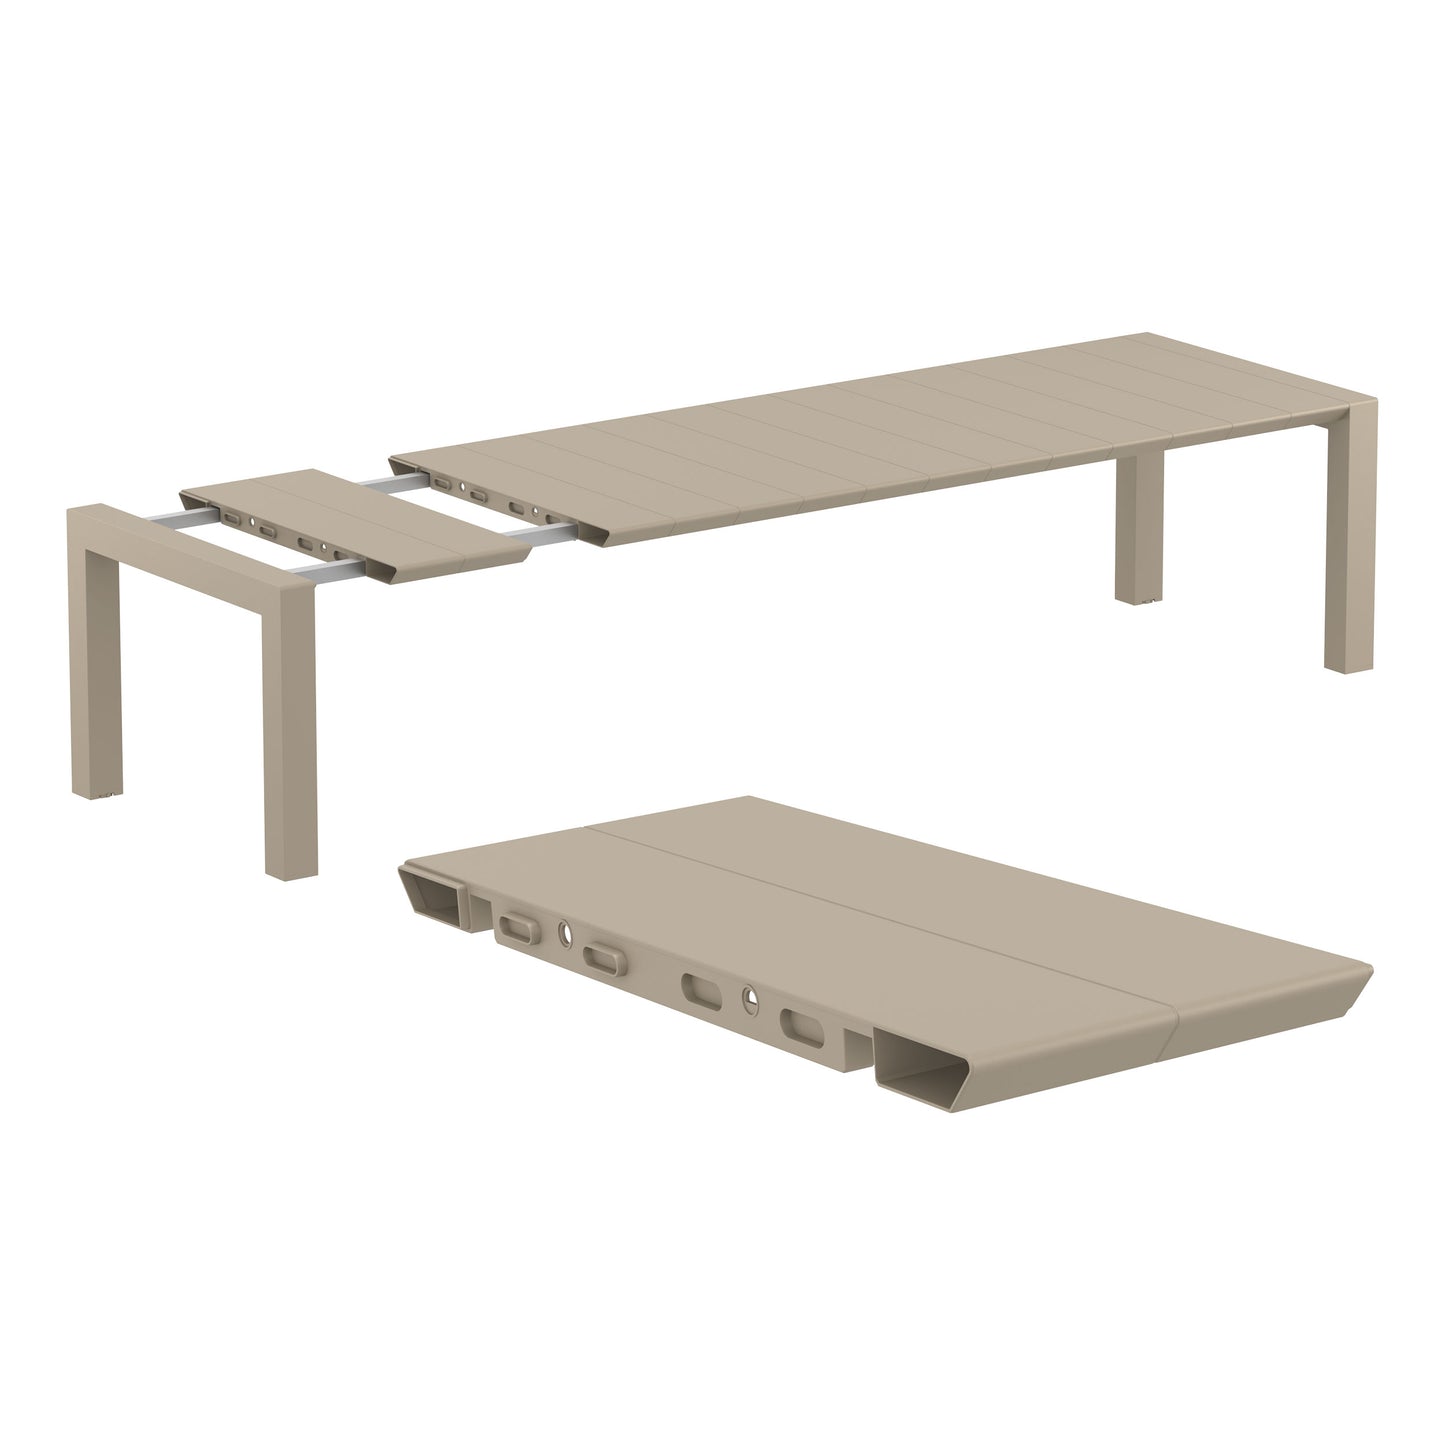 Whitehaven Outdoor Extension Table - Latte (2600mm or 3000mm)